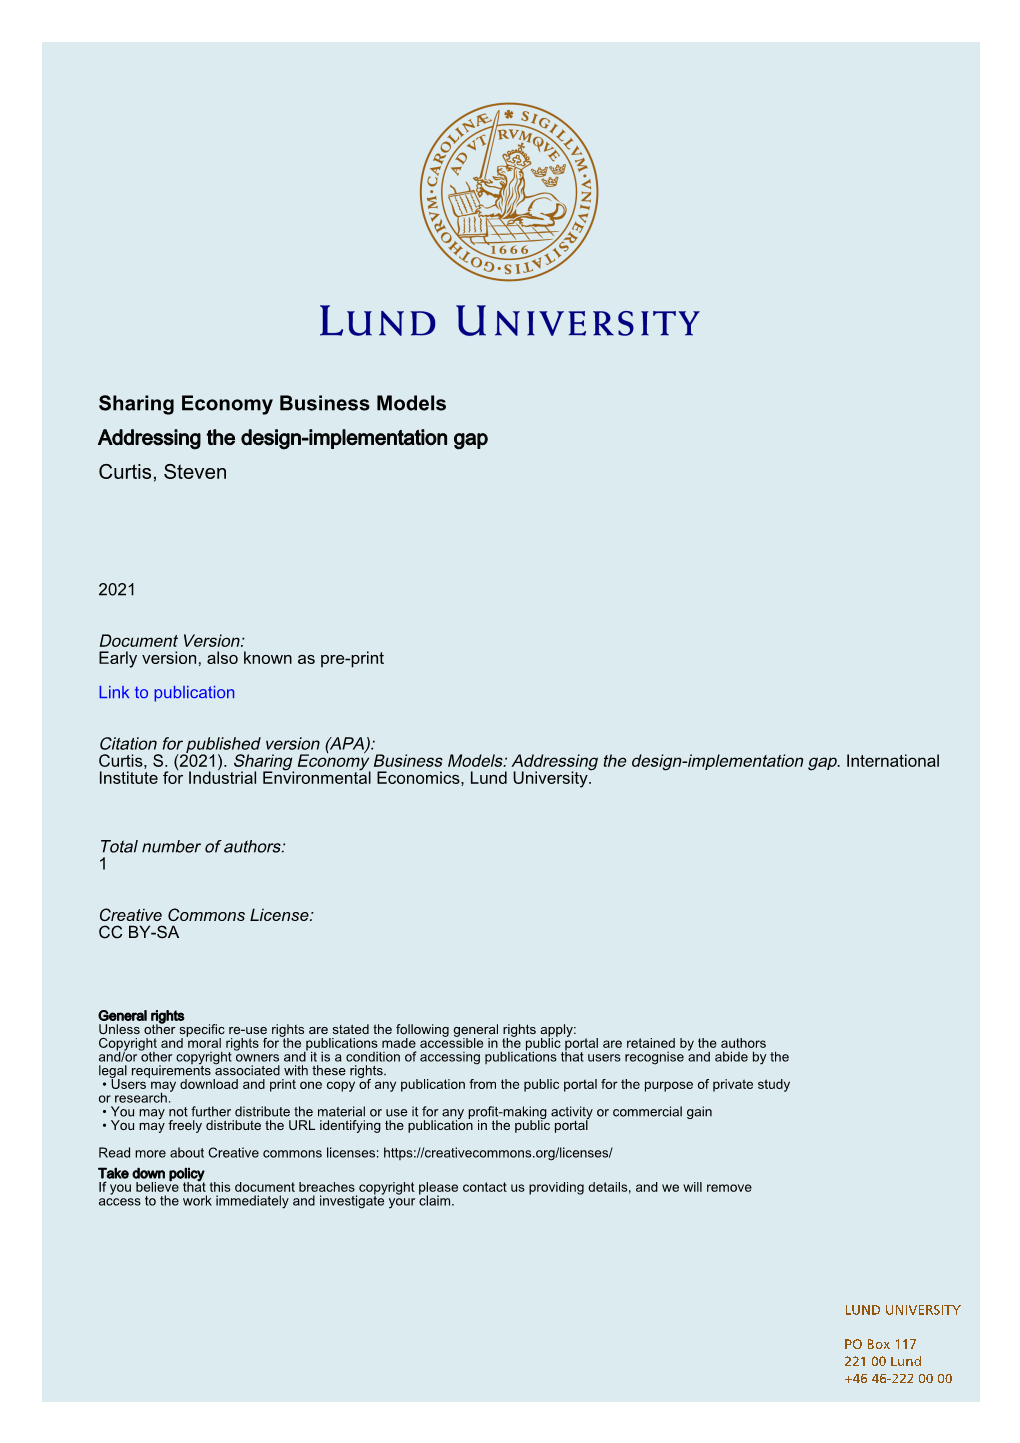 STEVEN KANE CURTIS | IIIEE | LUND UNIVERSITY Users Interested in the Sharing Economy